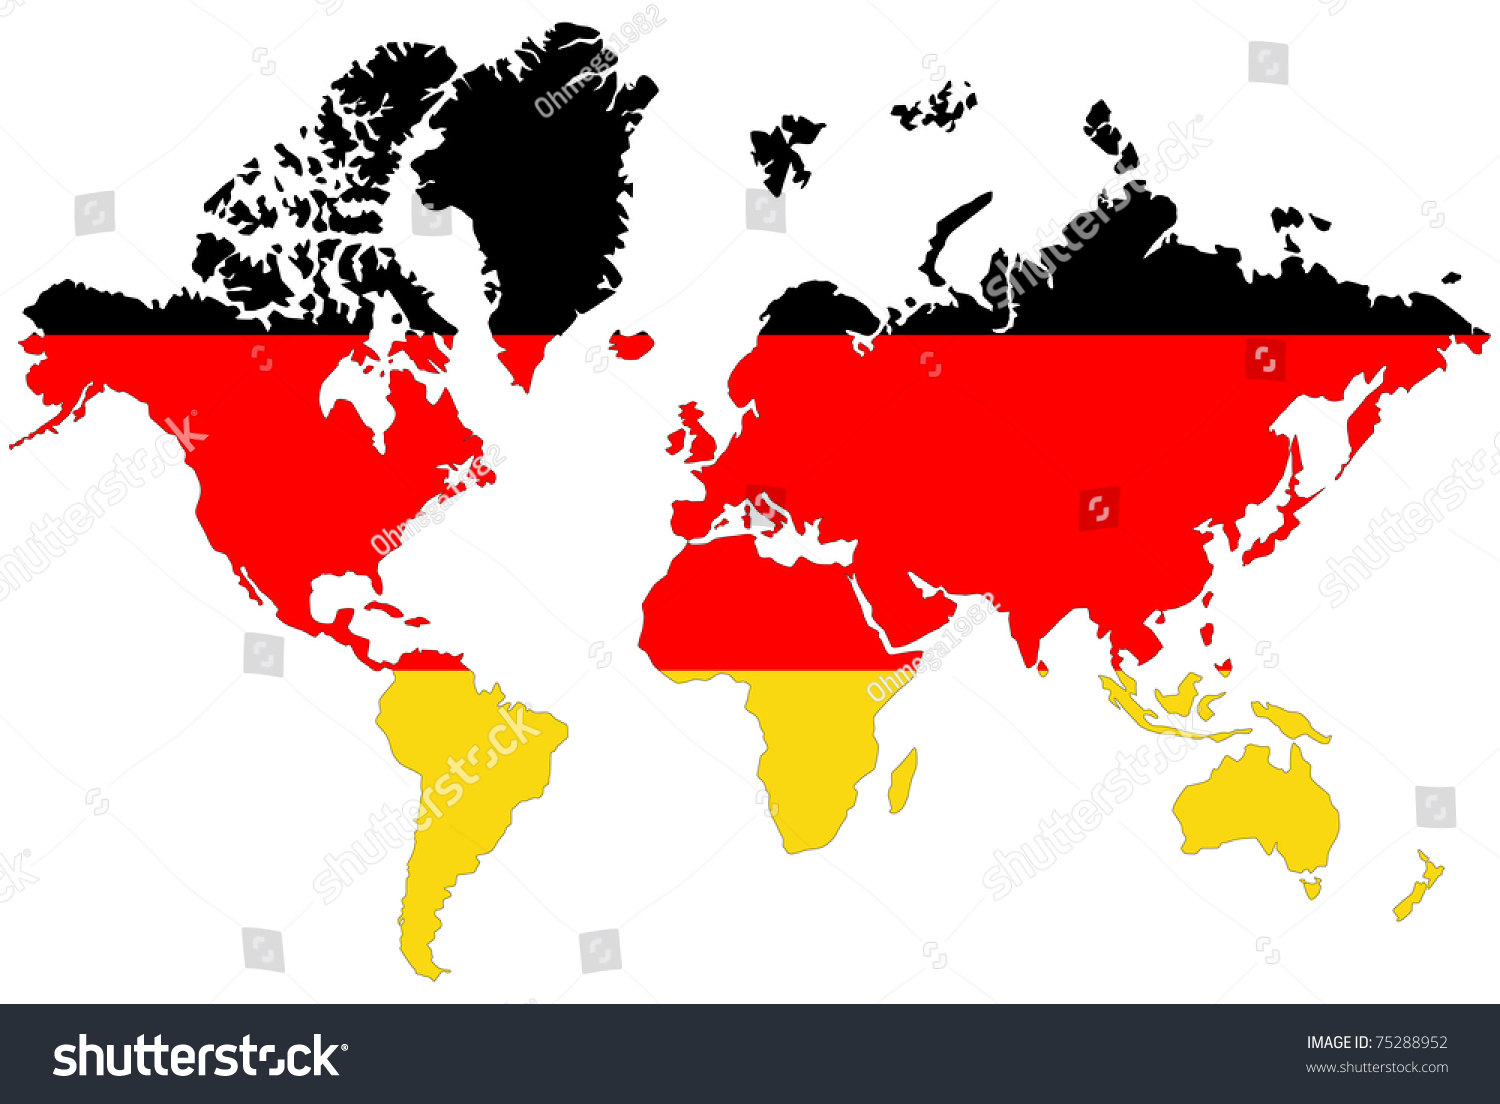 Premium Vector Location Of Germany On The World Map W - vrogue.co